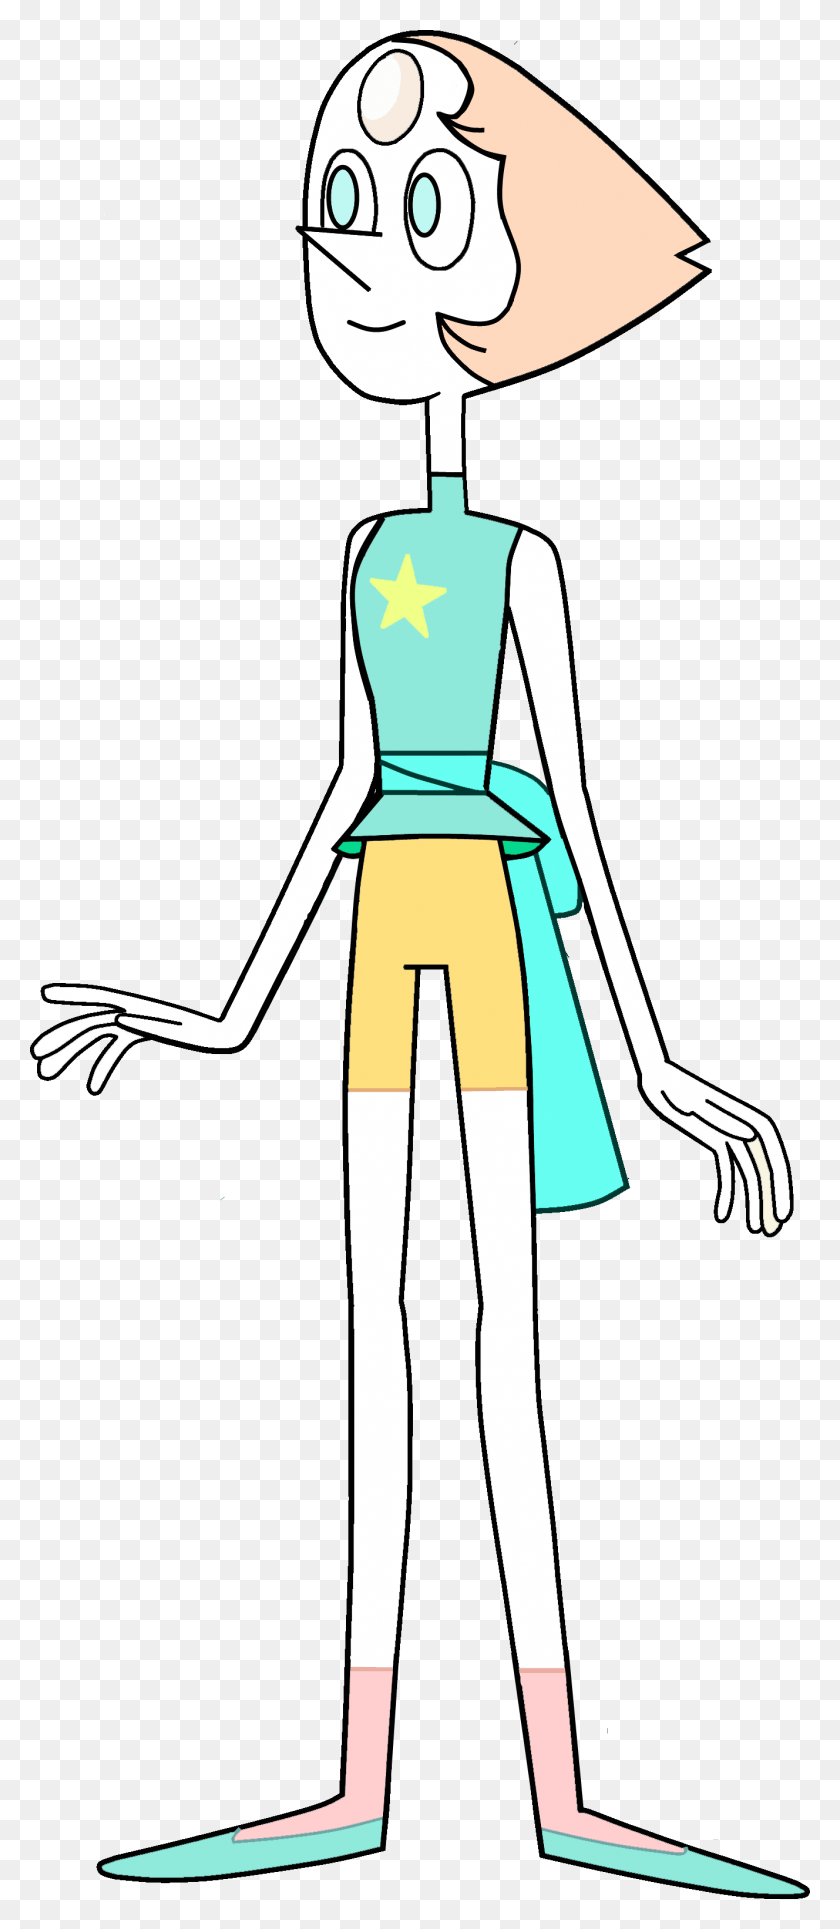 1328x3183 Descargar Png Clipart Library Stock Crystalgems Wikia Fandom Powered Steven Universe Personajes Pearl, Tie Hd Png